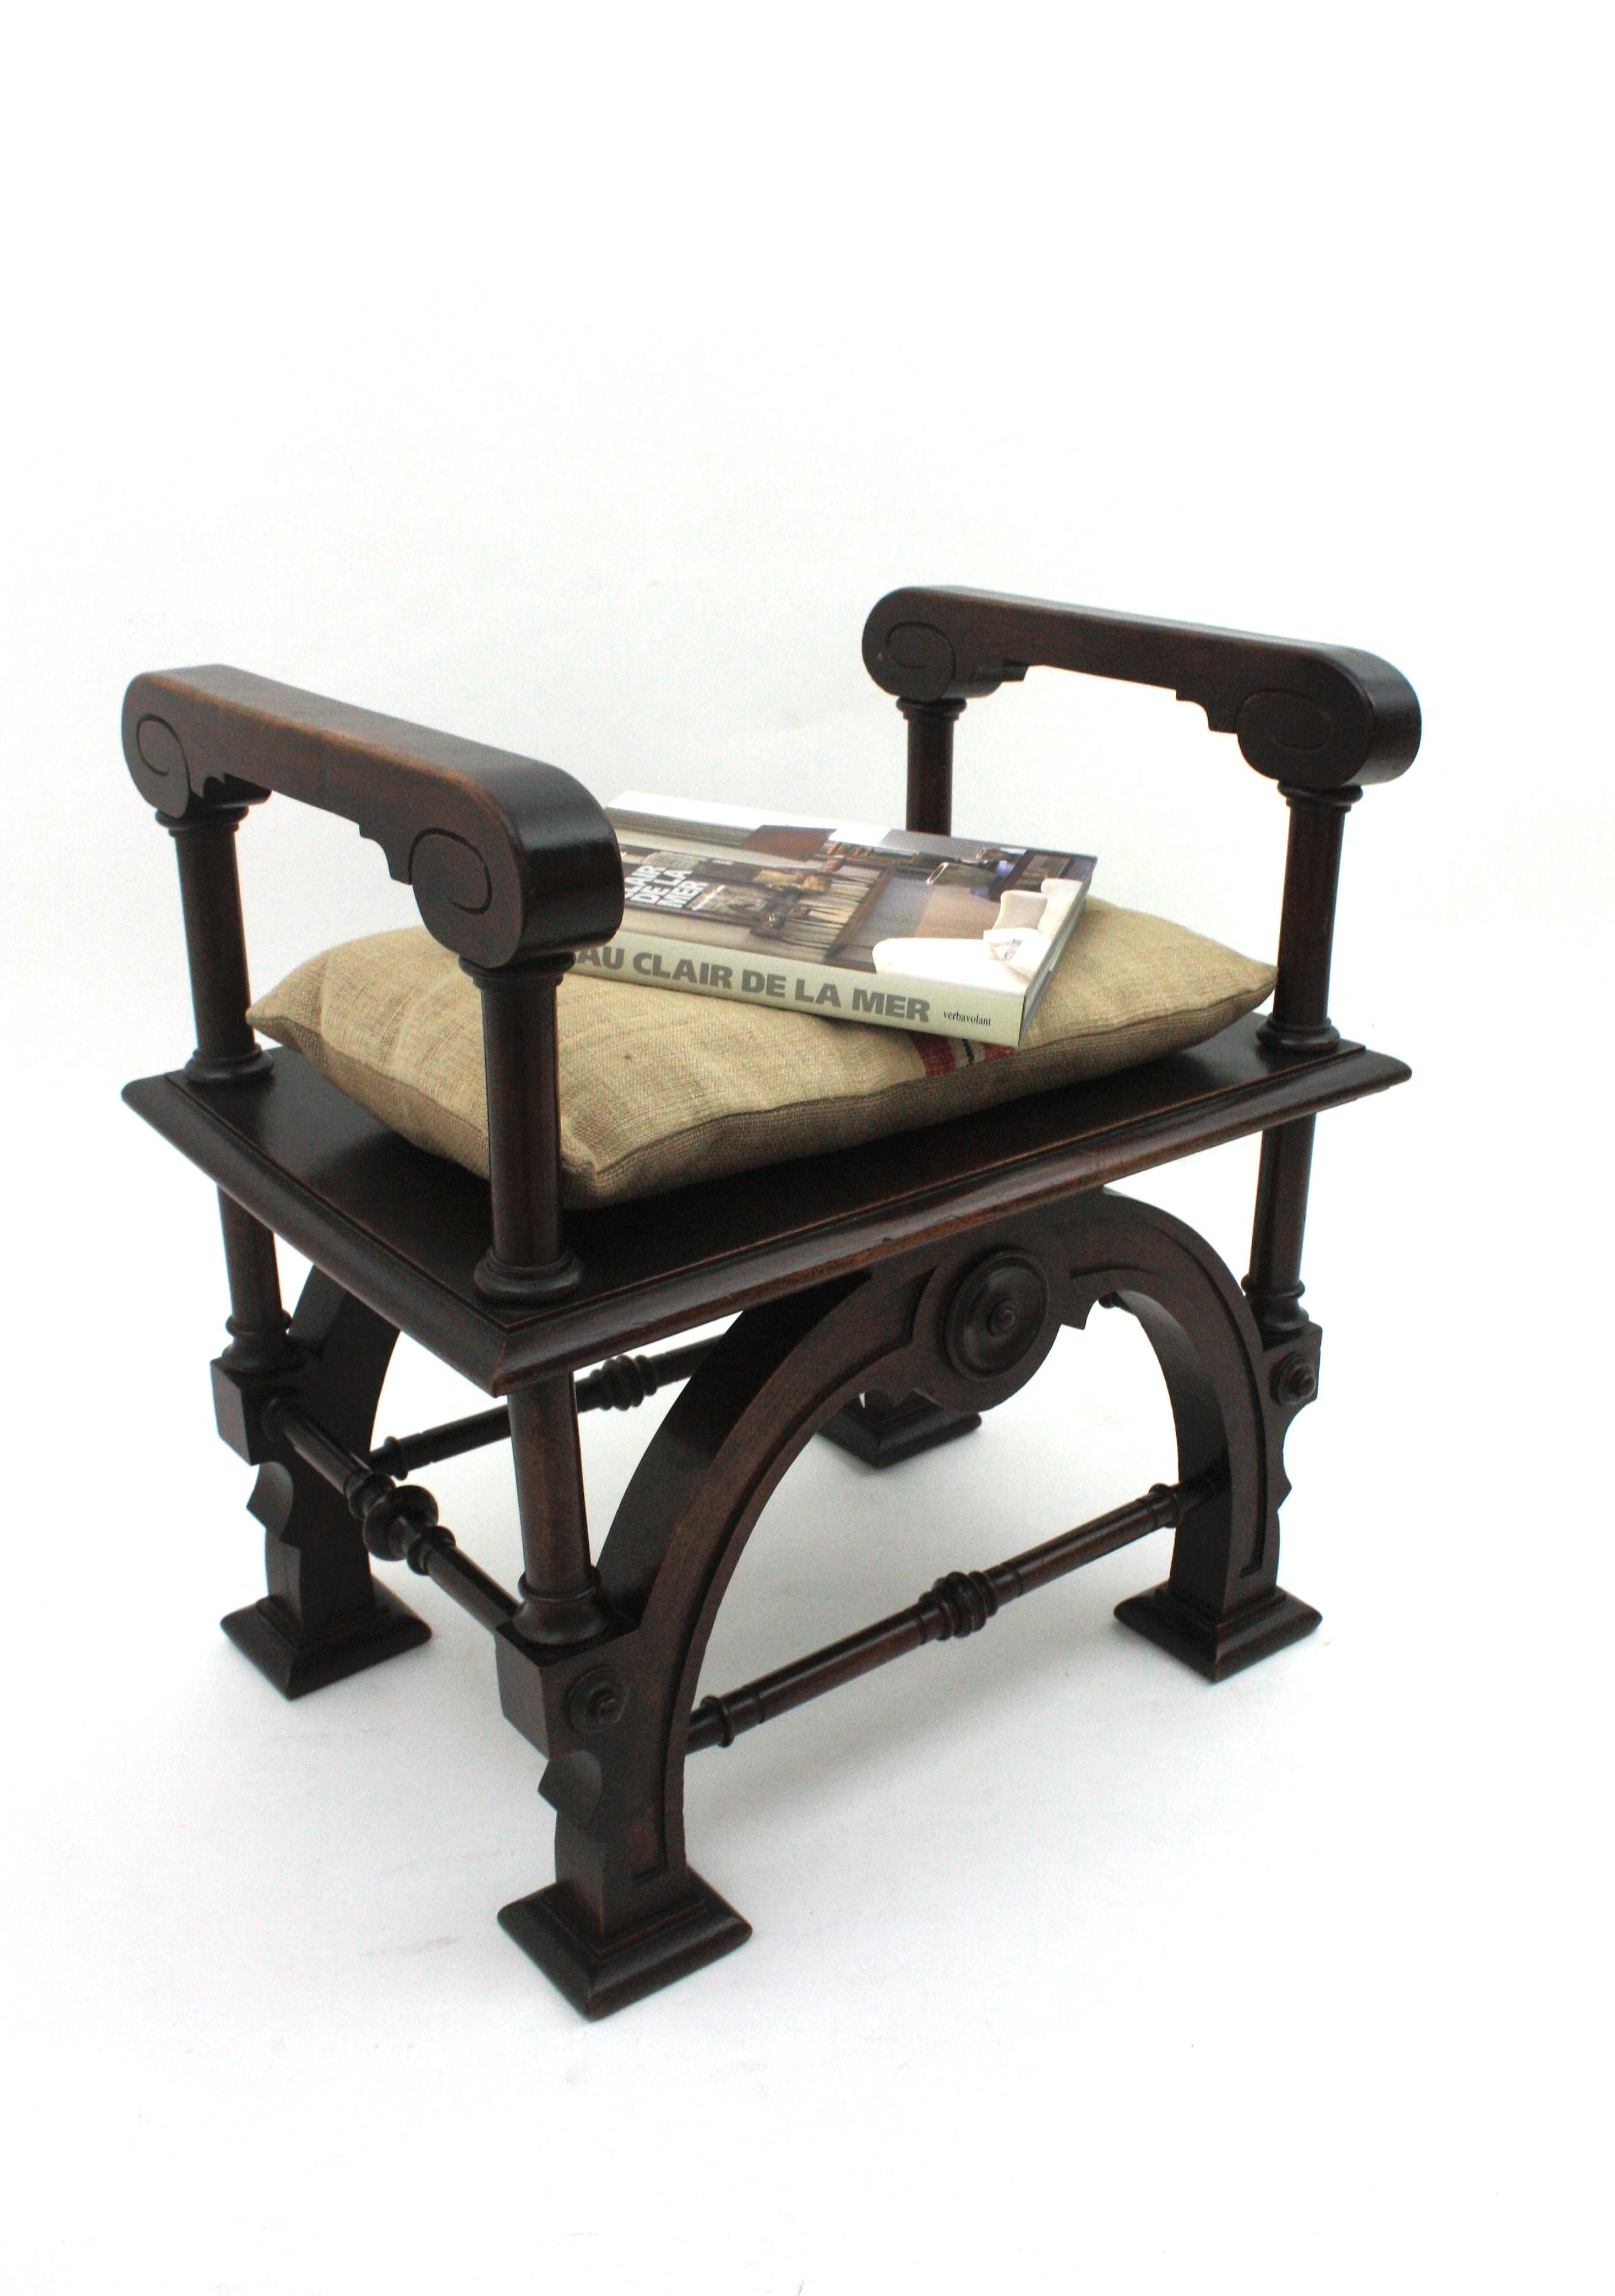 Spanish Revival Carved Stool or Bench in Walnut, 1940s For Sale 7